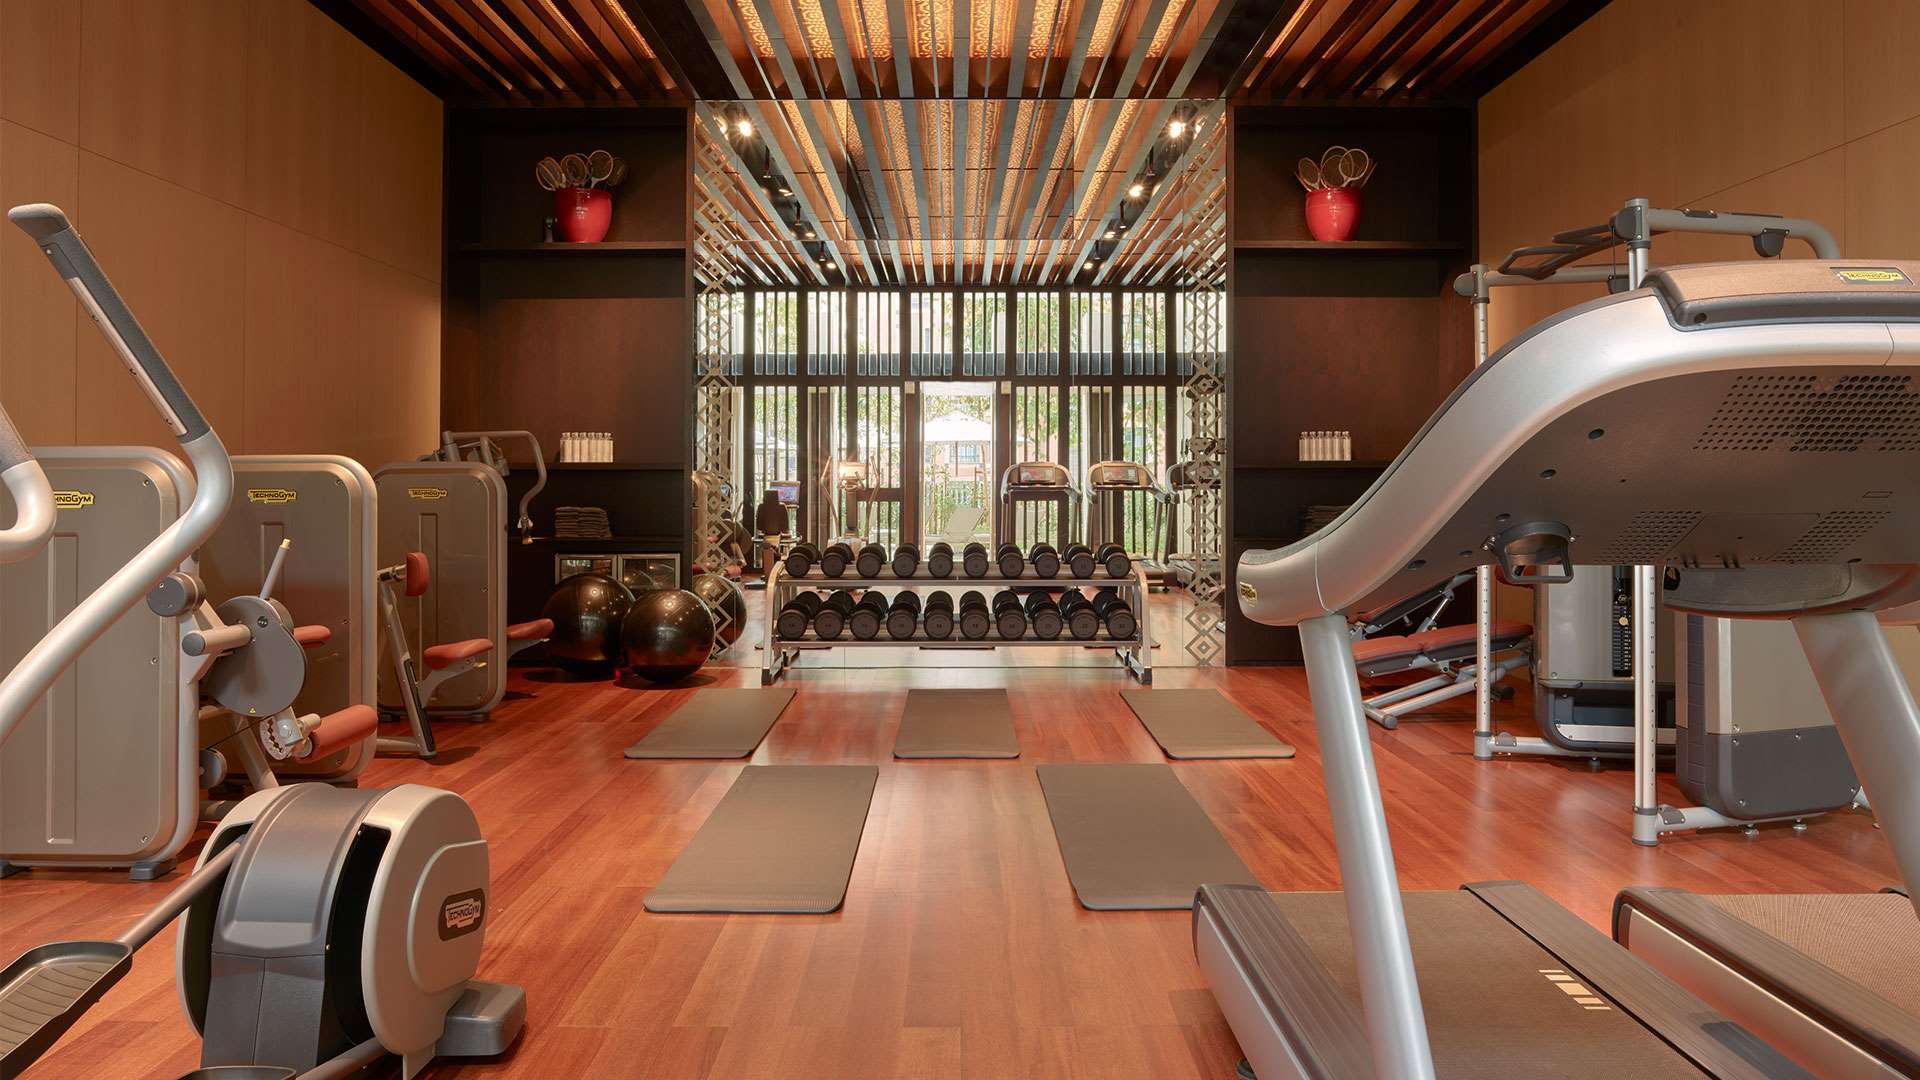 Fitness equipment in the Gym at The RuMa Hotel & Residences